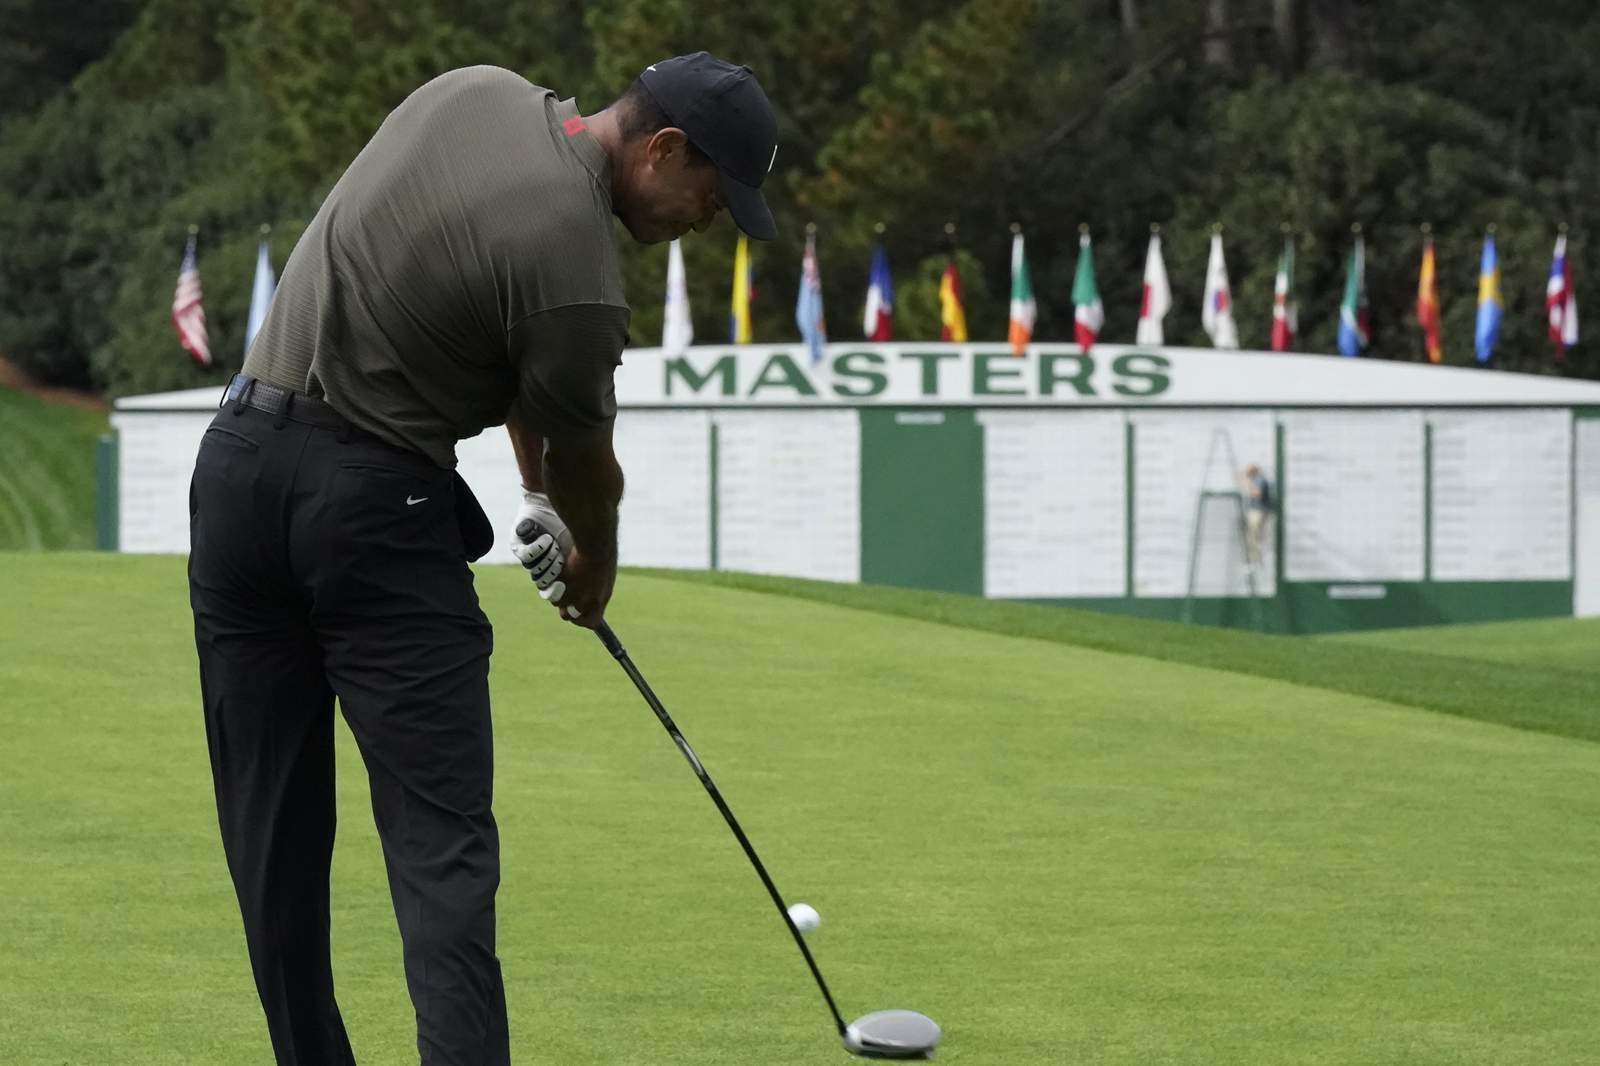 Fast start: Tiger bucks his Masters history with opening 68